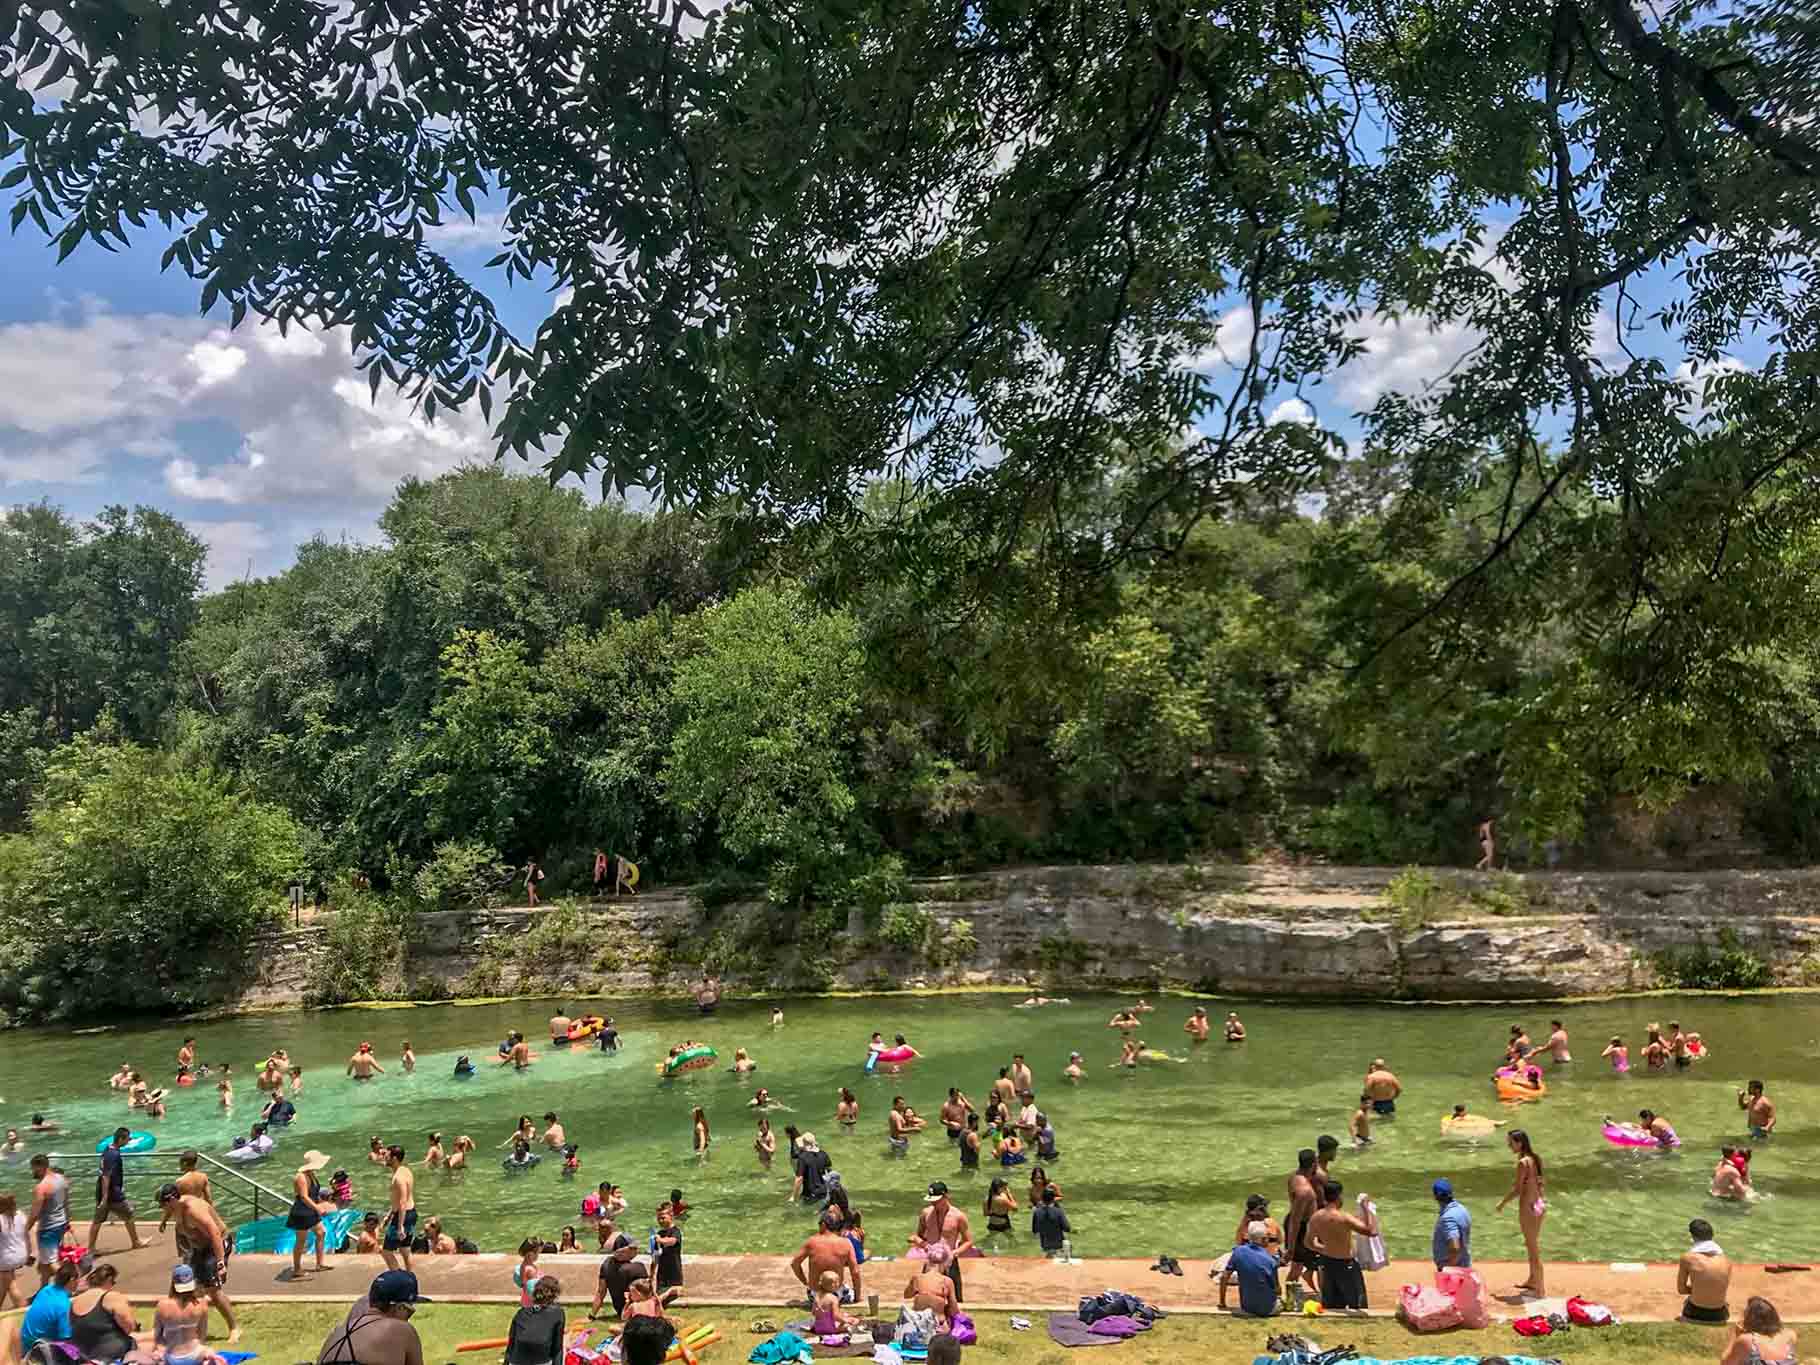 People swimming and relaxing in the natural spring at Barton Springs Pool